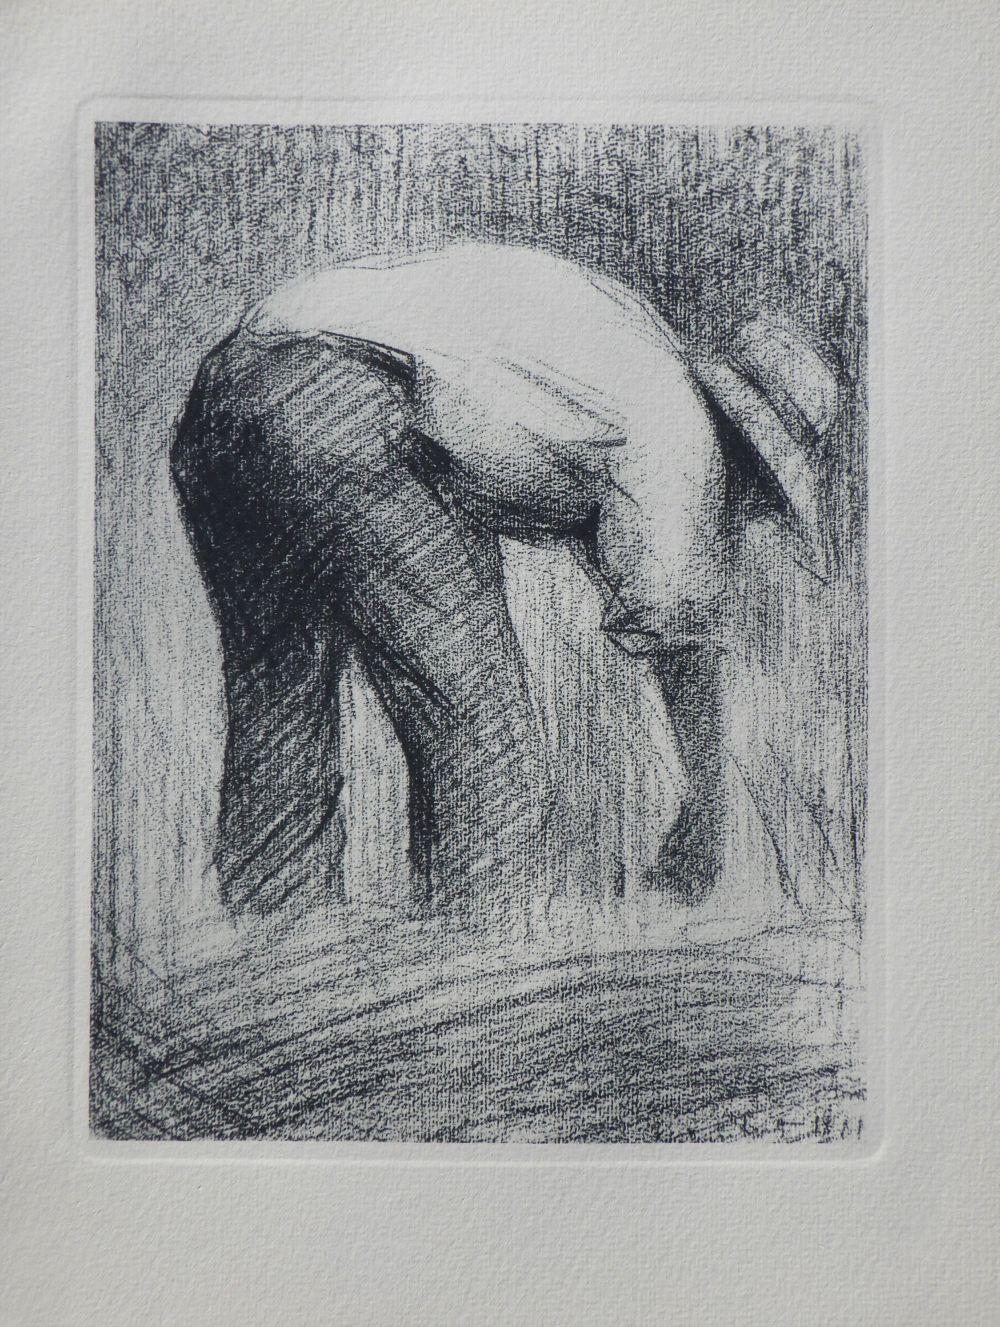 Artwork by Georges Seurat, Georges SEURAT - Le moissonneu, Made of Engraving
On Arches Vellum